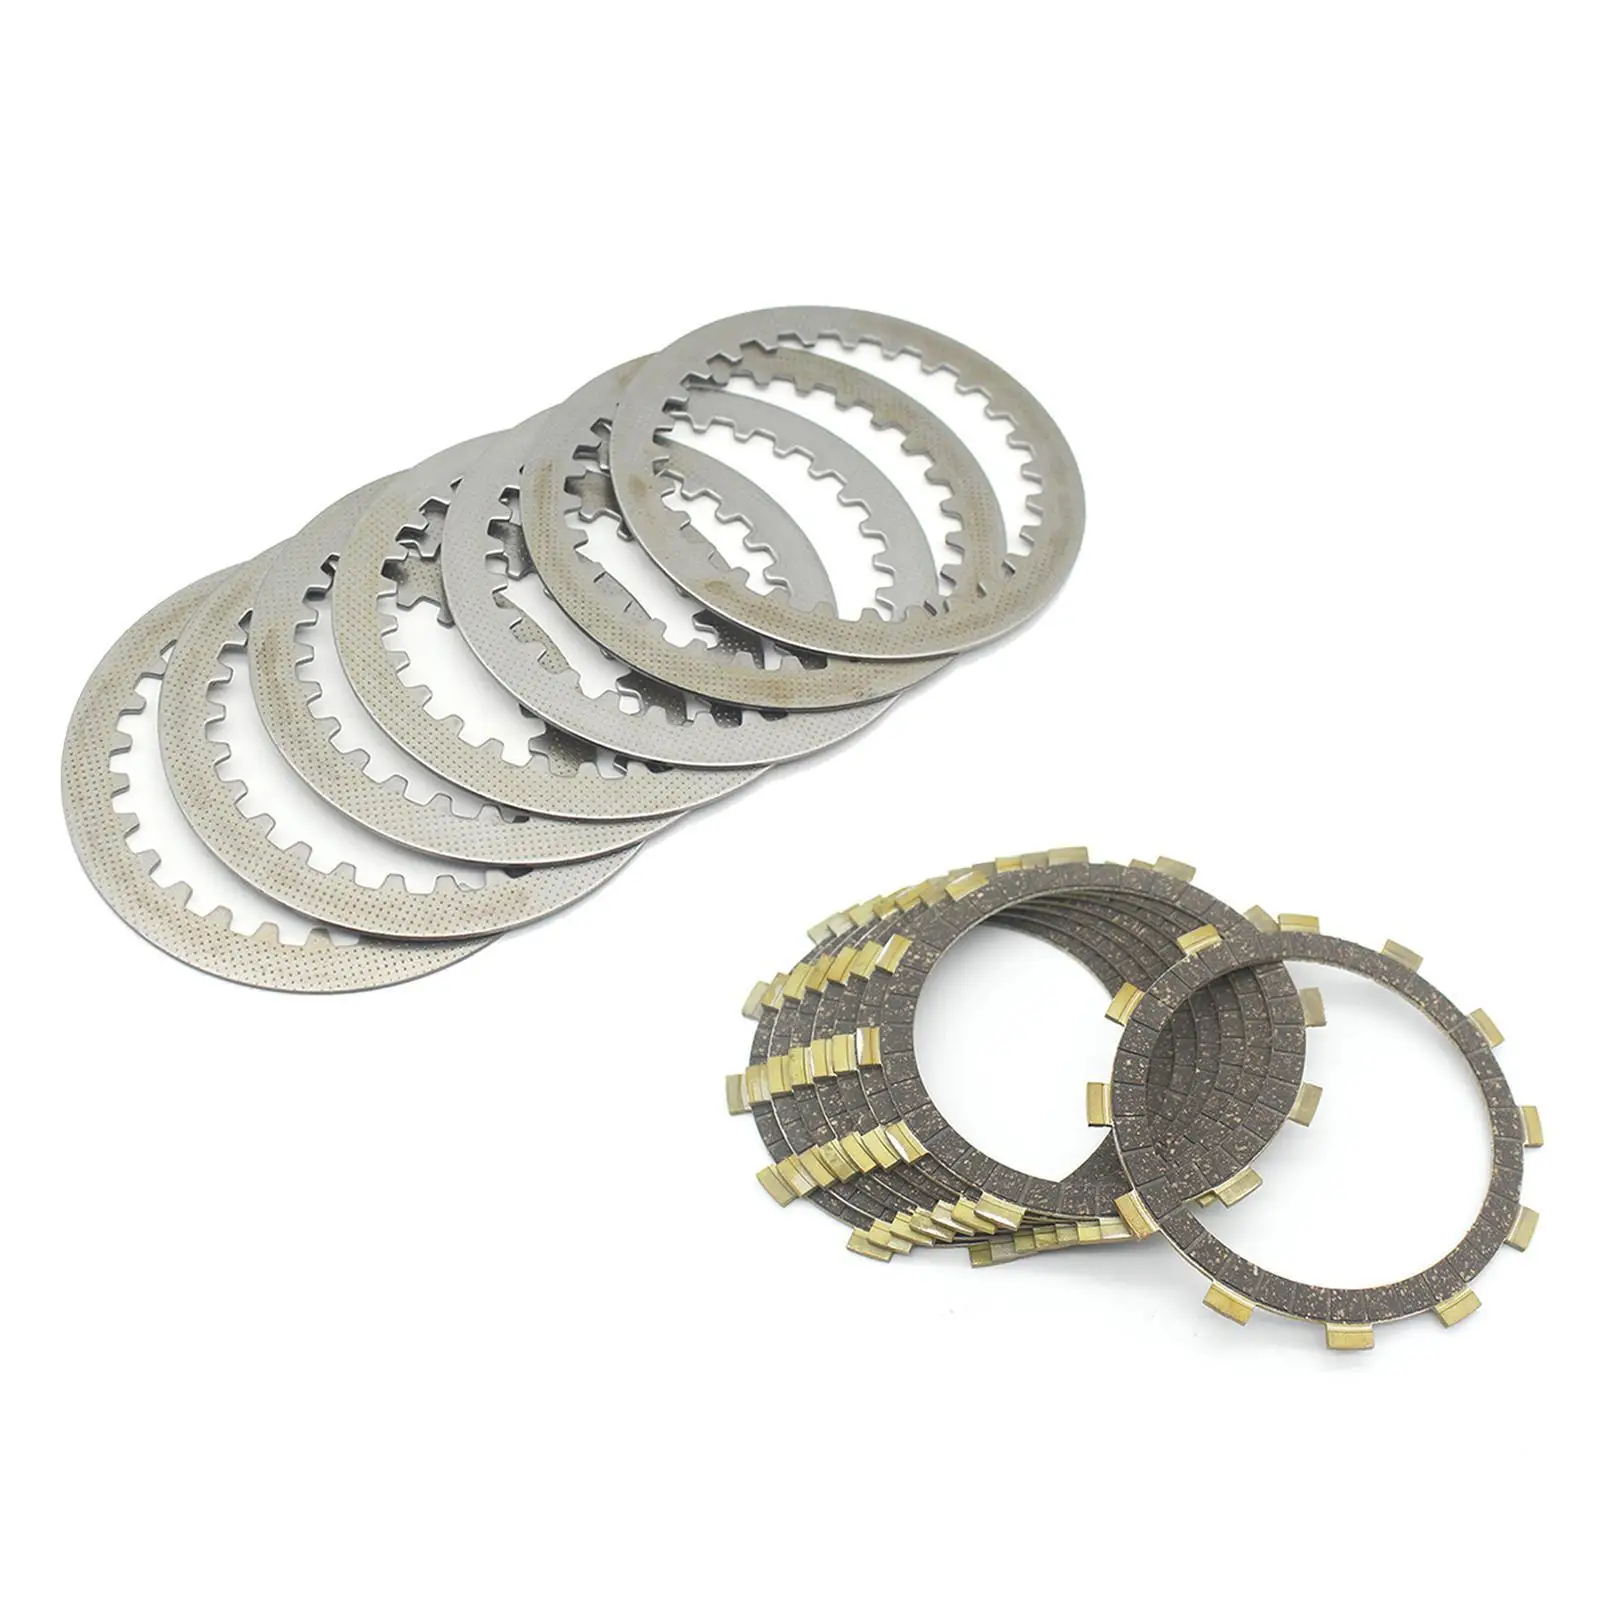 Clutch Friction Plates Disc  for XJR400 4HM FZ600 XJ650 Motocross ATV Outdoor 4H7-16321-01 4H7-16321-02 8 168-16325-00